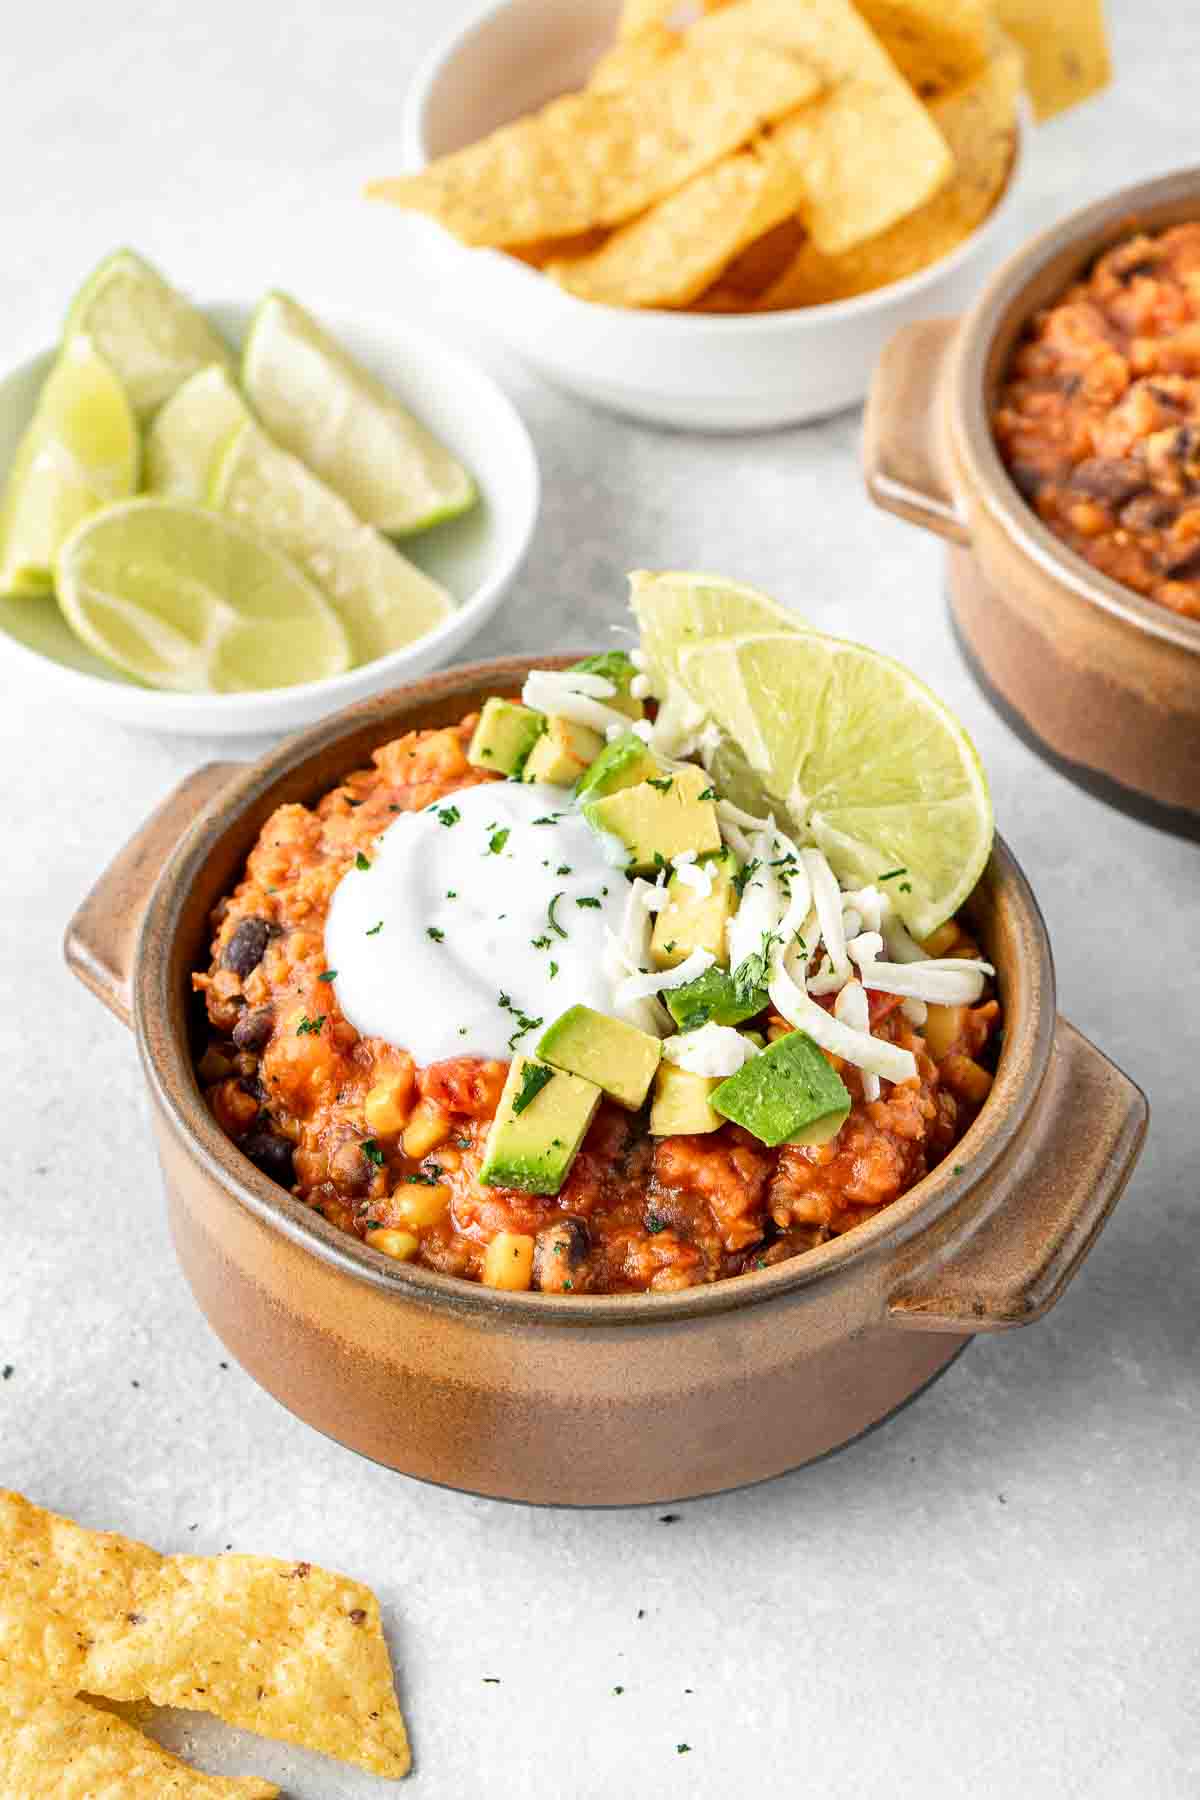 Vegan chilli served in a bowl topped with vegan sour cream, avocado, cheese and lime.